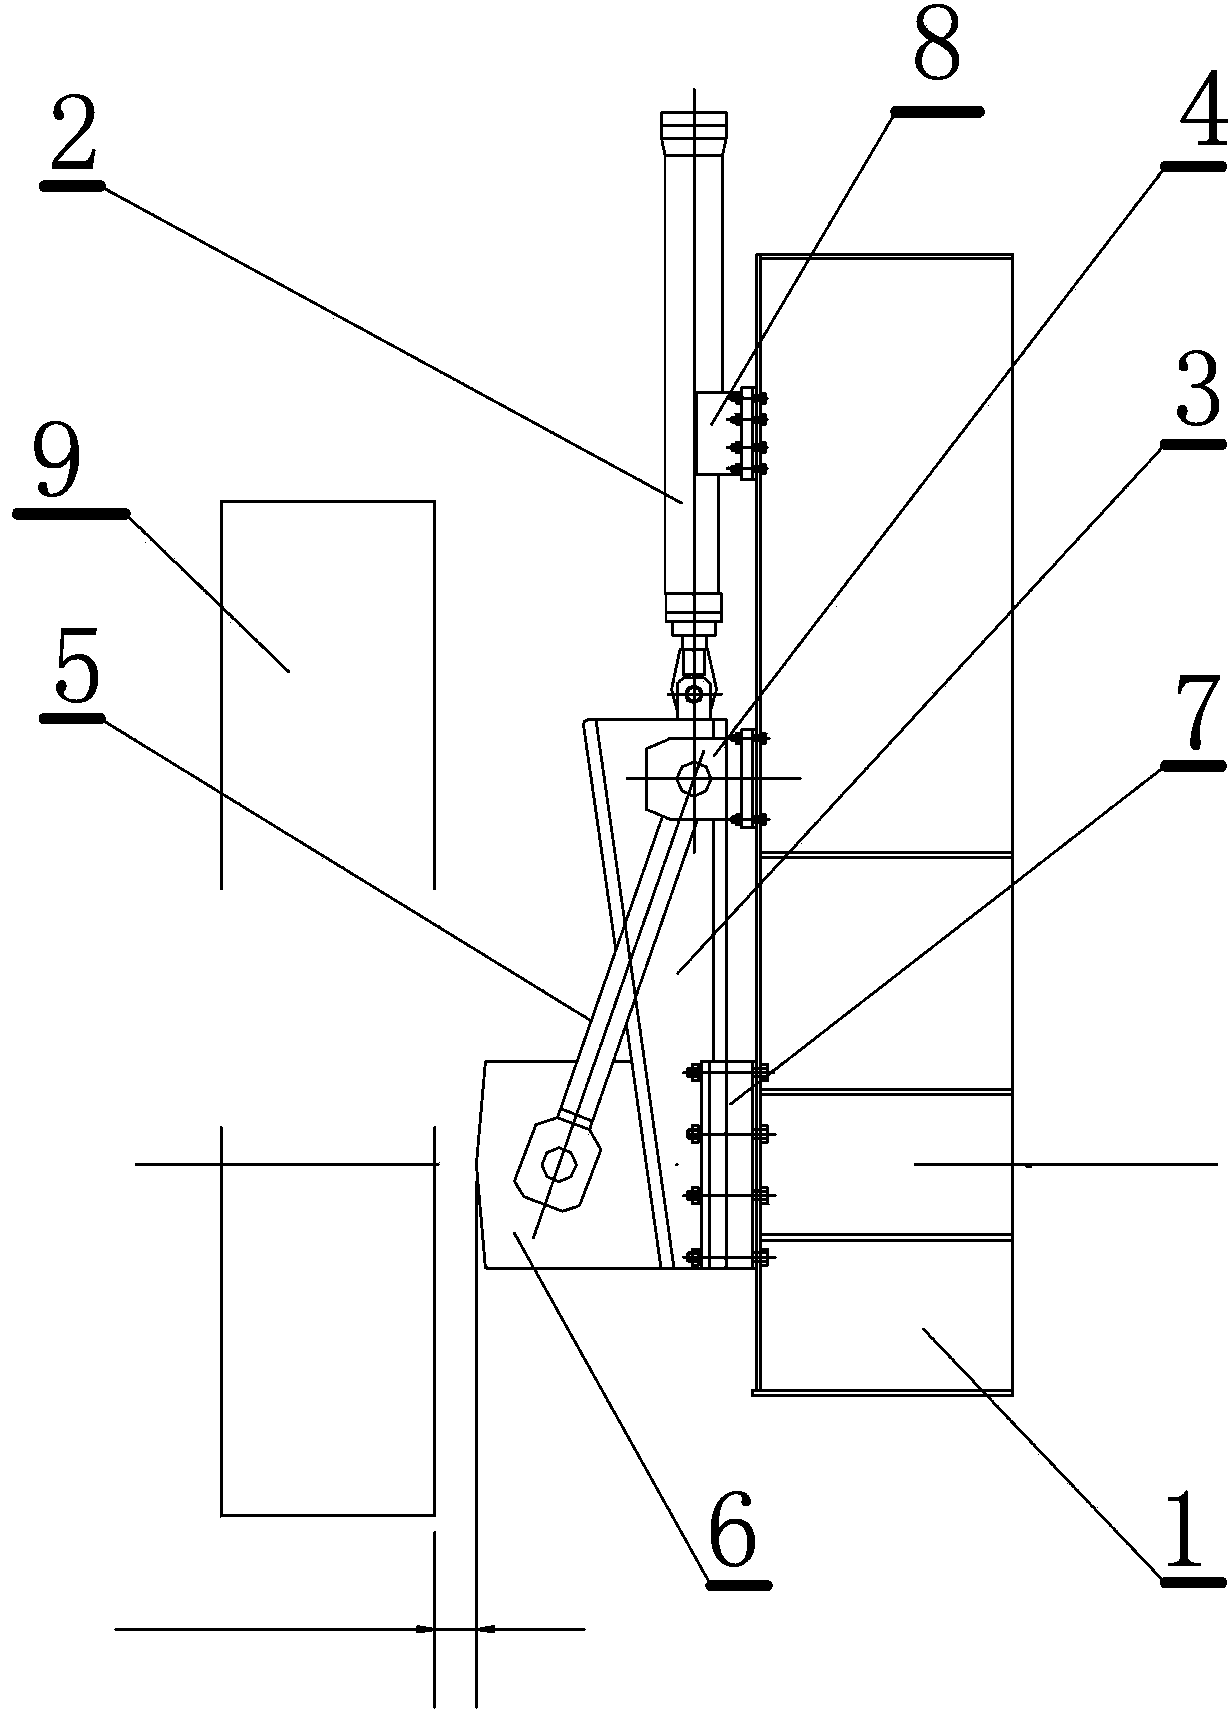 Wedge-shaped block self-locking top tight device for ship lift